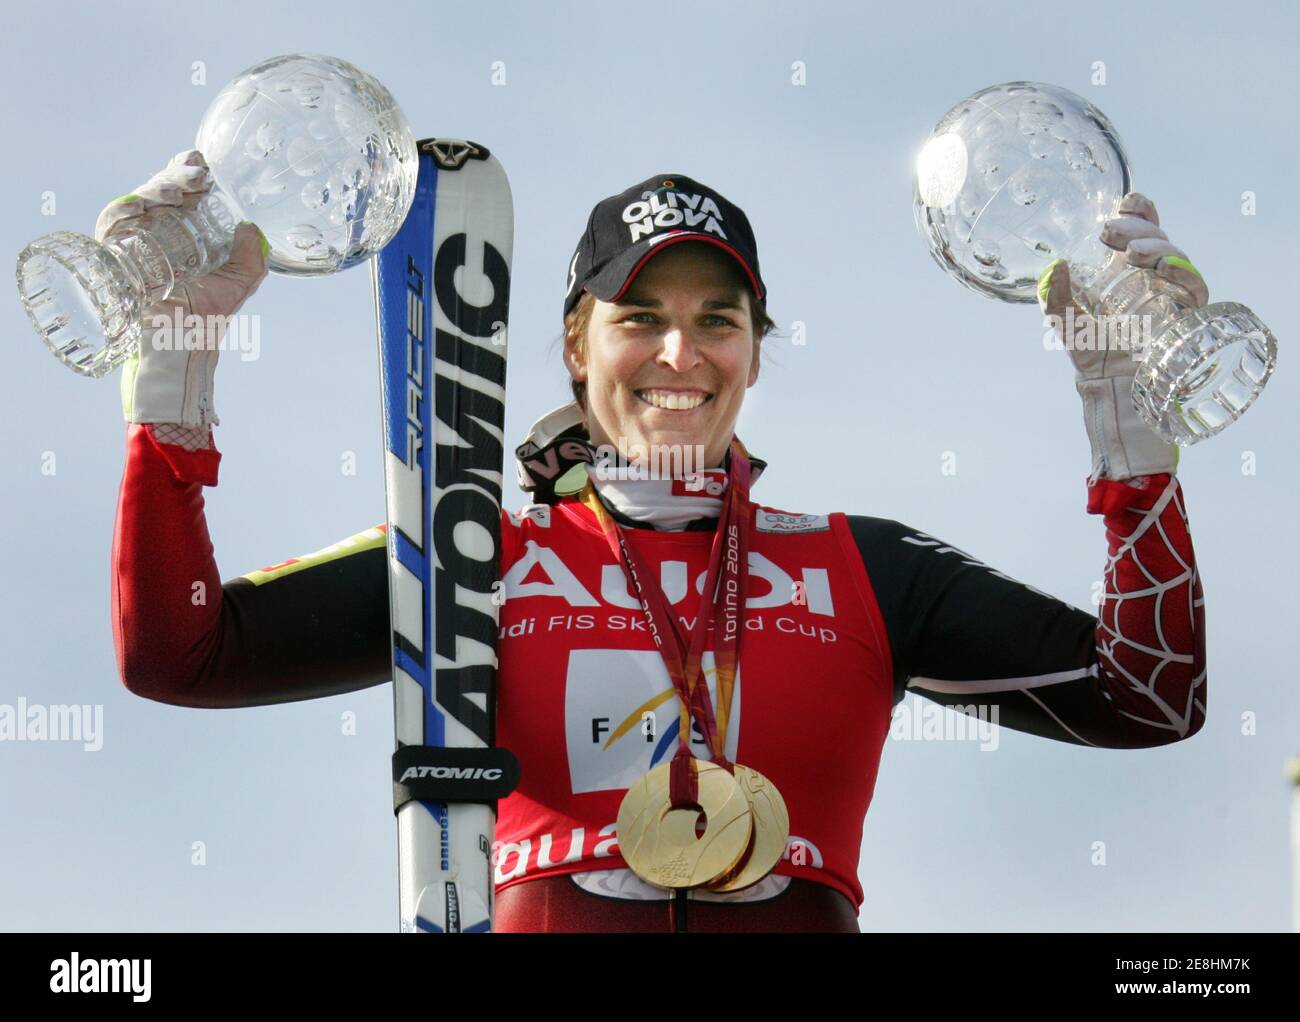 Michaela Dorfmeister of Austria shows her women's super-G and downhill World Cup trophys and her Torino 2006 Olympic Winter Games downhill and super-G gold medals following the season's last super-G World Cup race at the Alpine Skiing World Cup Finals in Are, Sweden March 16, 2006. Stock Photo